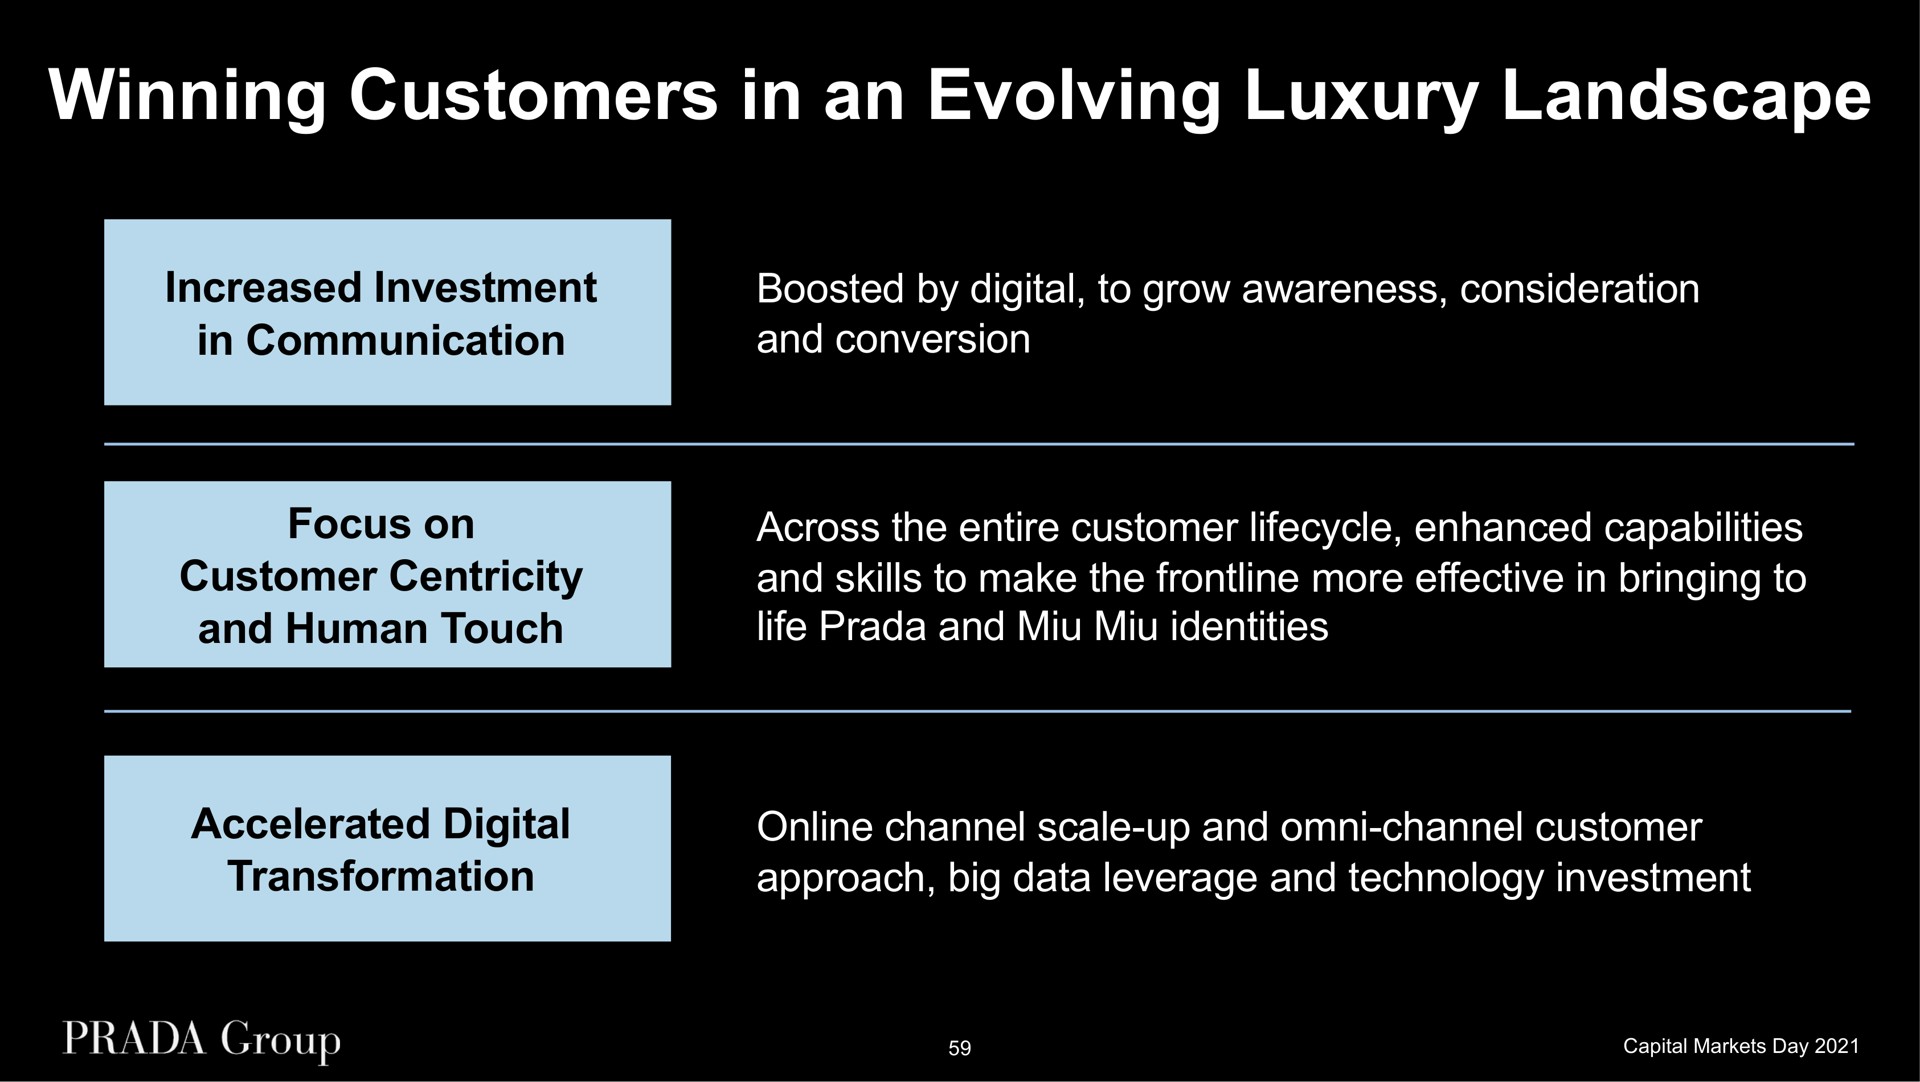 winning customers in an evolving luxury landscape increased investment in communication boosted by digital to grow awareness consideration and conversion focus on customer centricity and human touch across the entire customer enhanced capabilities and skills to make the more effective in bringing to life and identities accelerated digital transformation channel scale up and channel customer approach big data leverage and technology investment | Prada